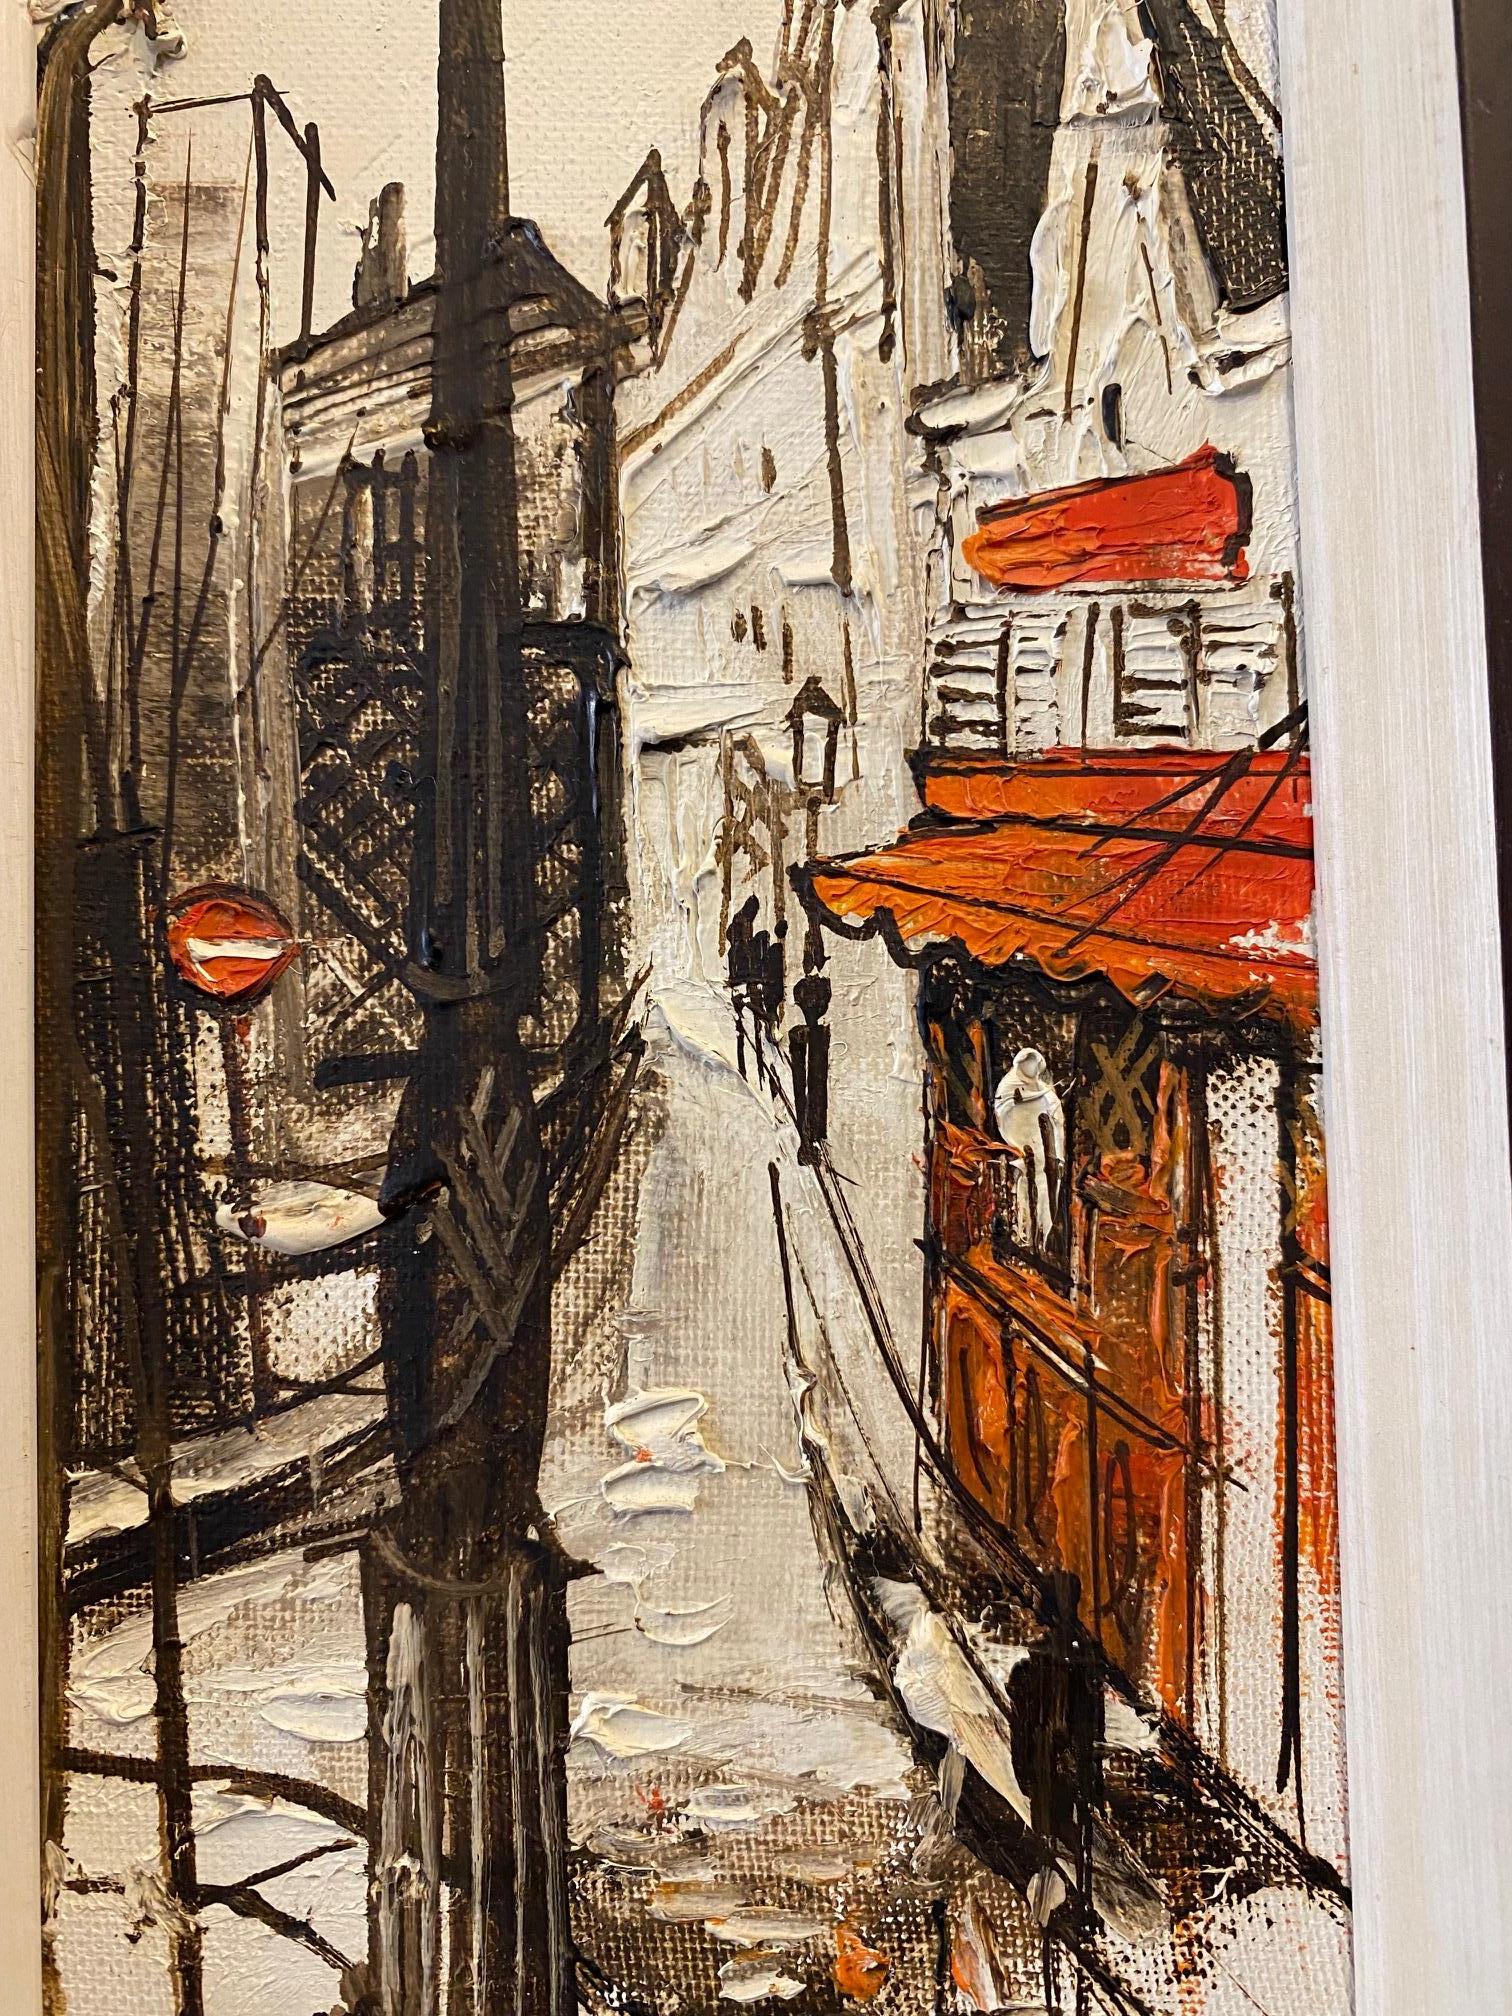 Paris 1983 by Rody - Oil on canvas 10x25 cm - Painting by Unknown